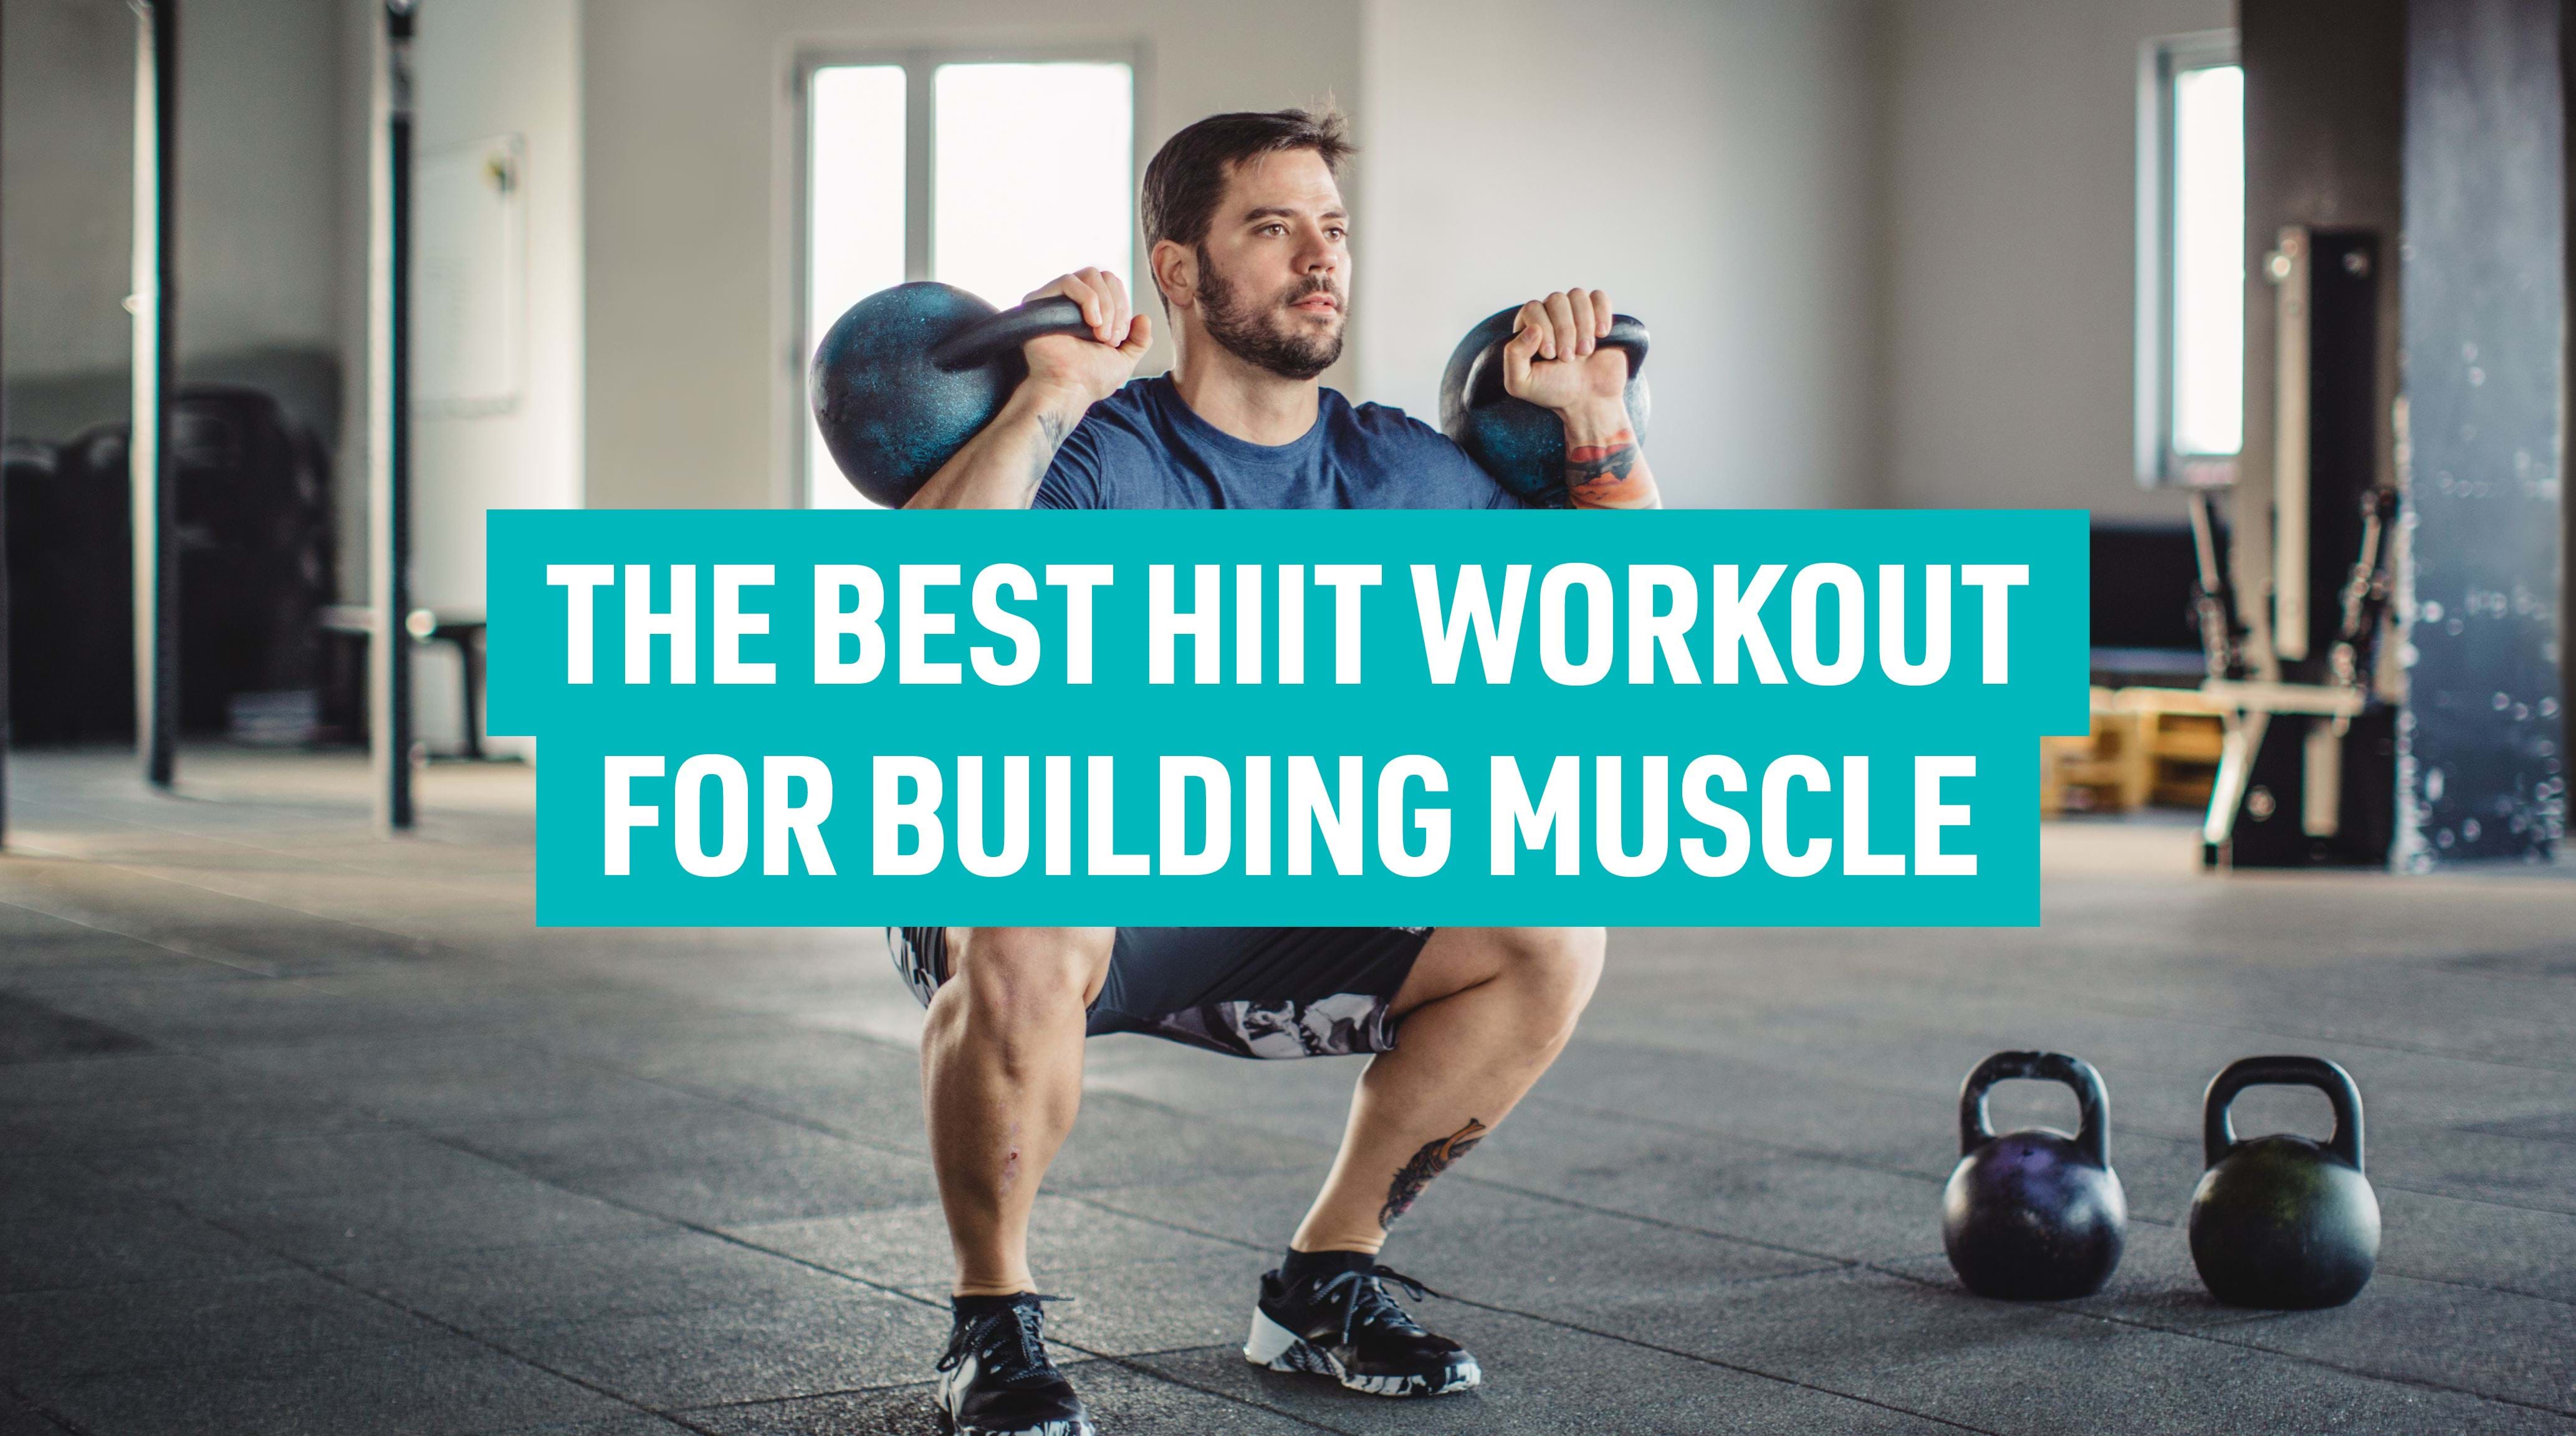 Which are the most effective HIIT cardio exercises for smaller